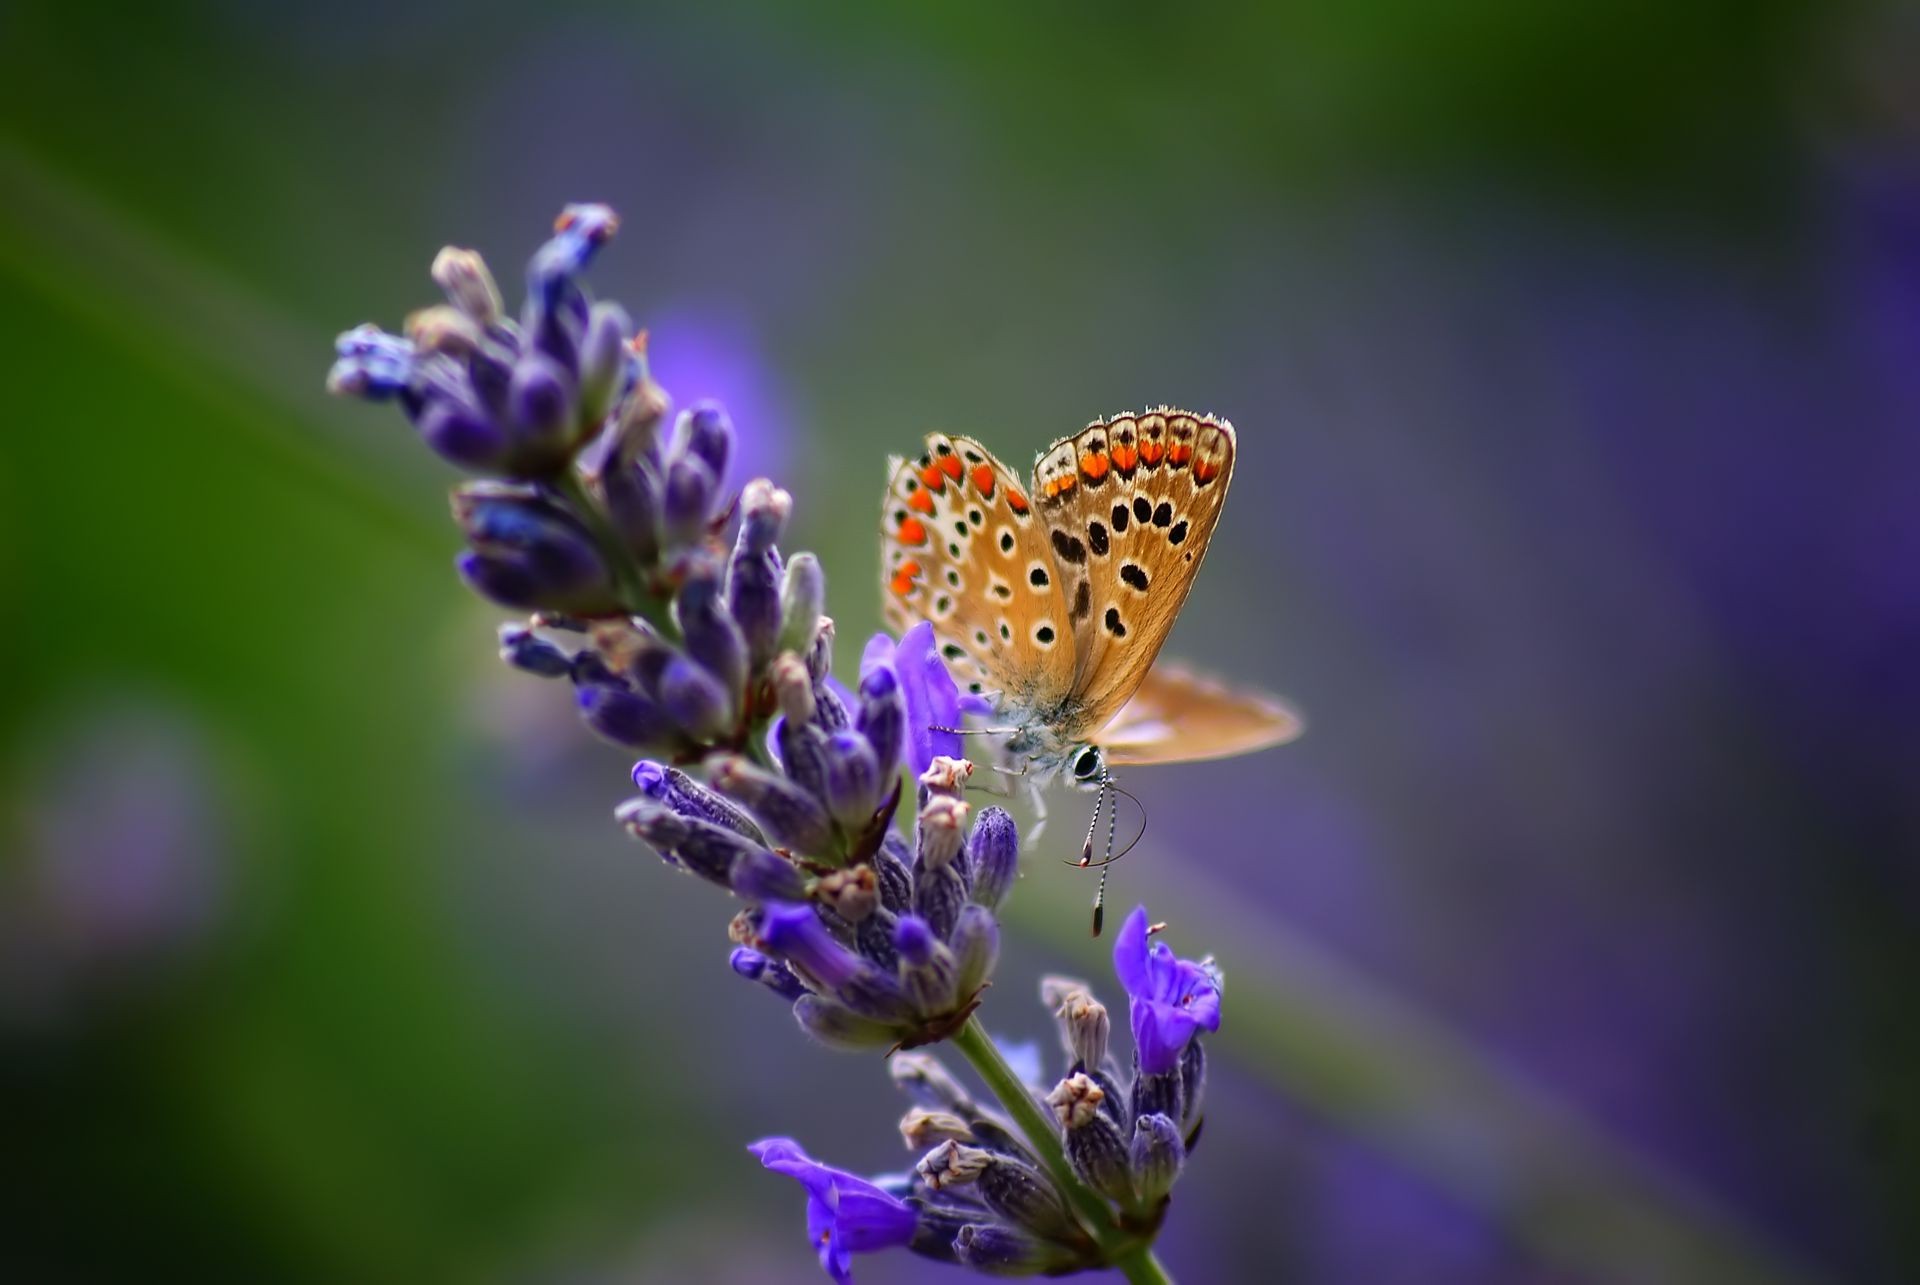 insects butterfly nature flower insect summer flora outdoors leaf garden lavender